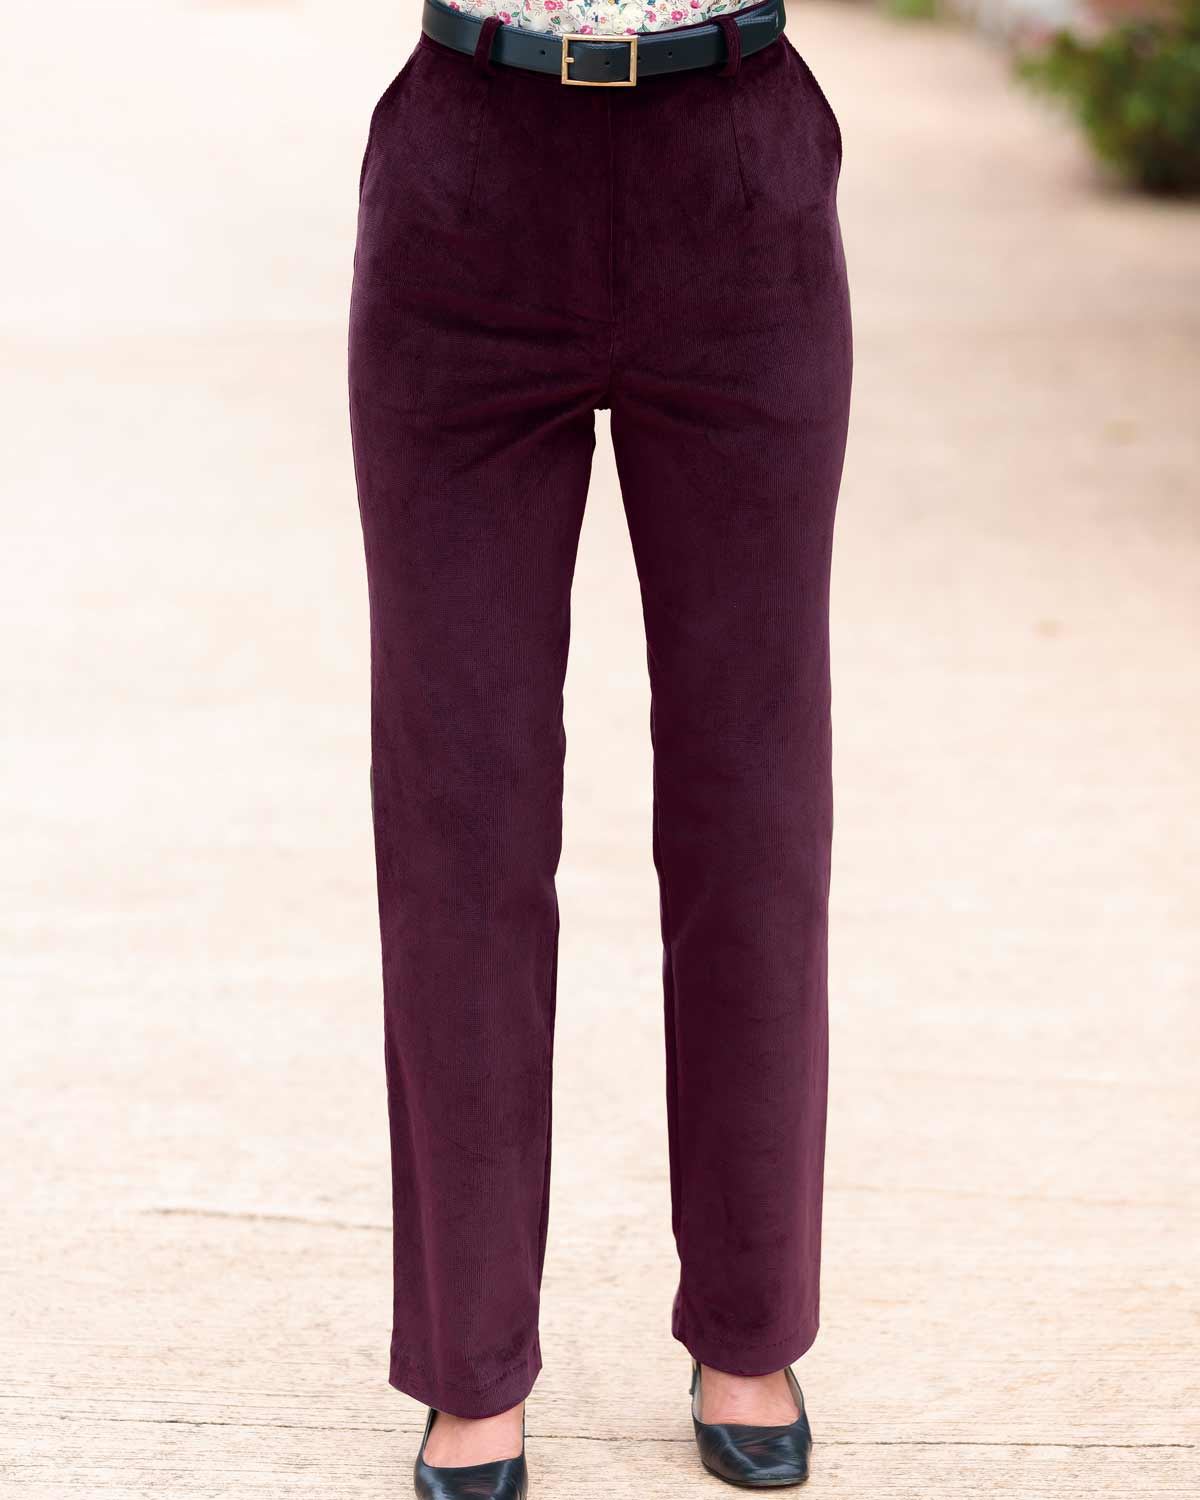 Ladies Flat Front Needlecord trousers. Aubergine, Navy, Olive.